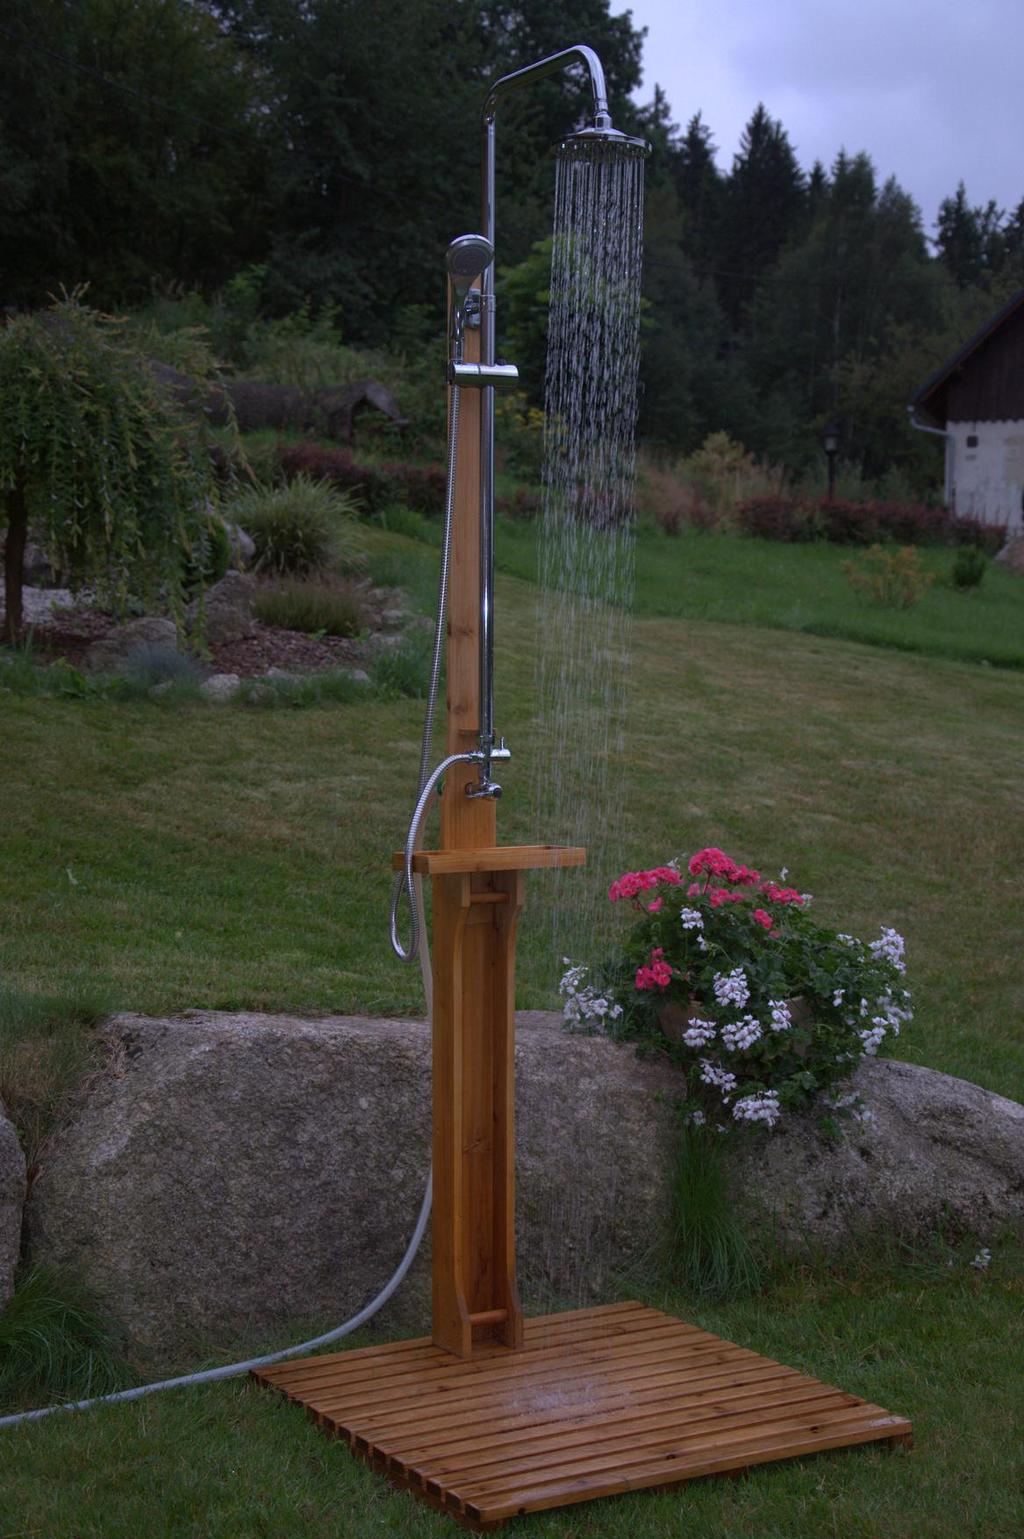 Garden Shower The wooden garden shower is ideal to provide cool refreshment in backyard, camping or after outdoor swimming.